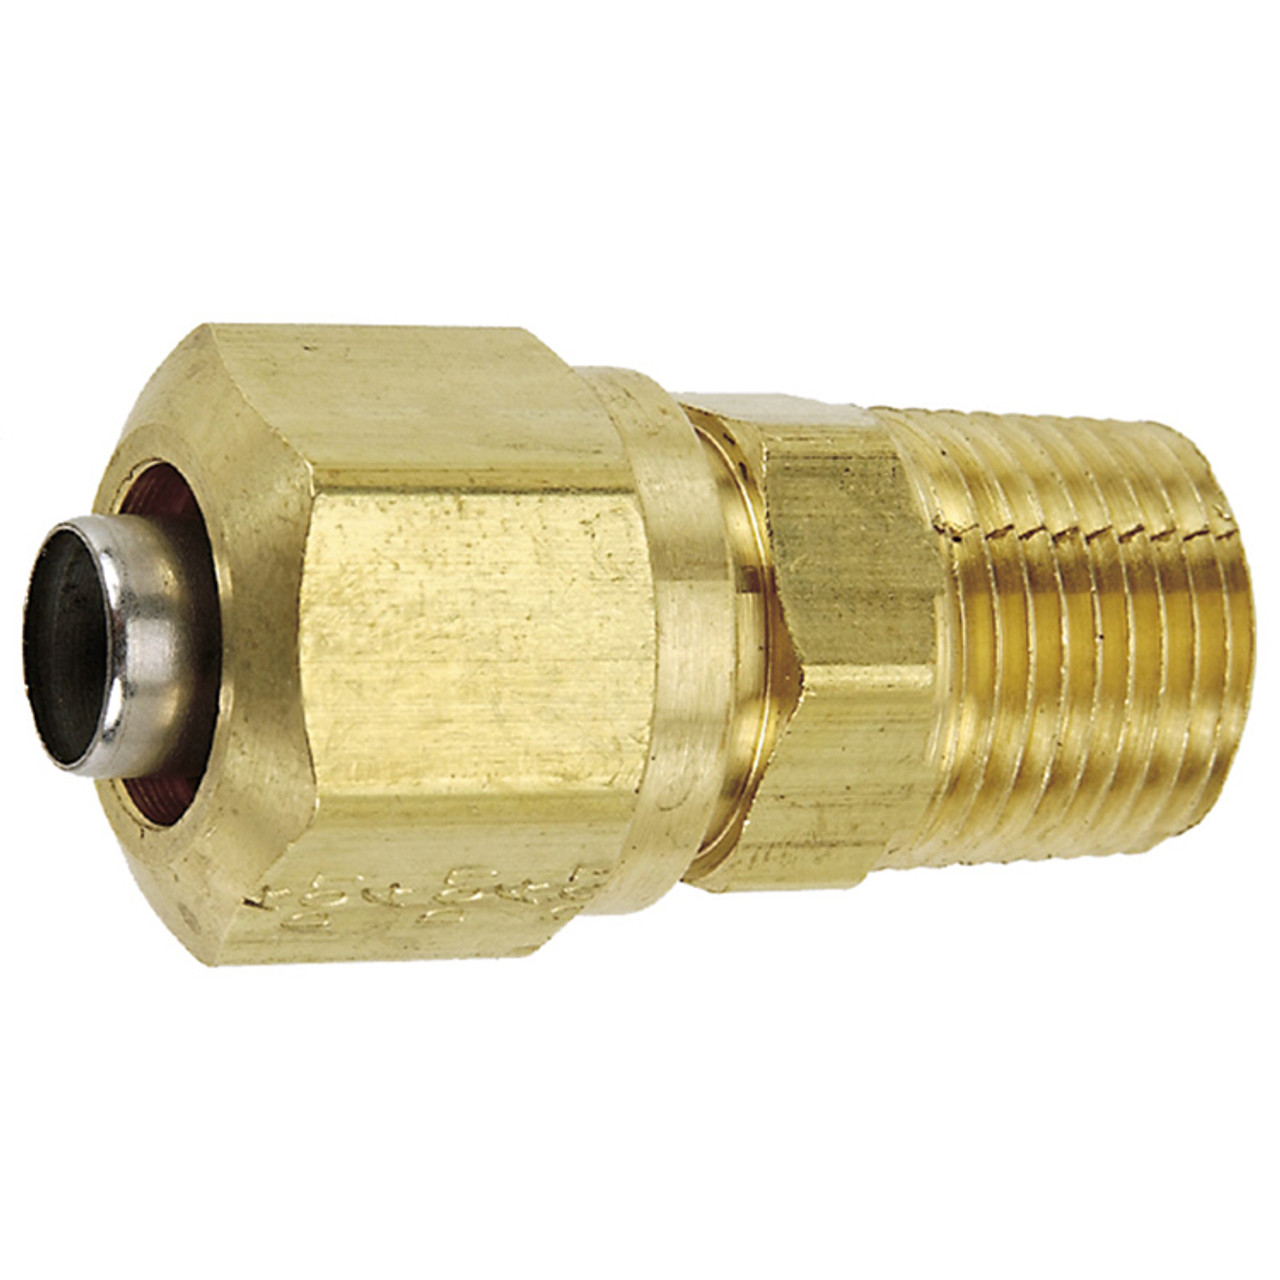 1/4 x 1/2" Brass DOT Male NPT - Compression Connector   G7016-04-08